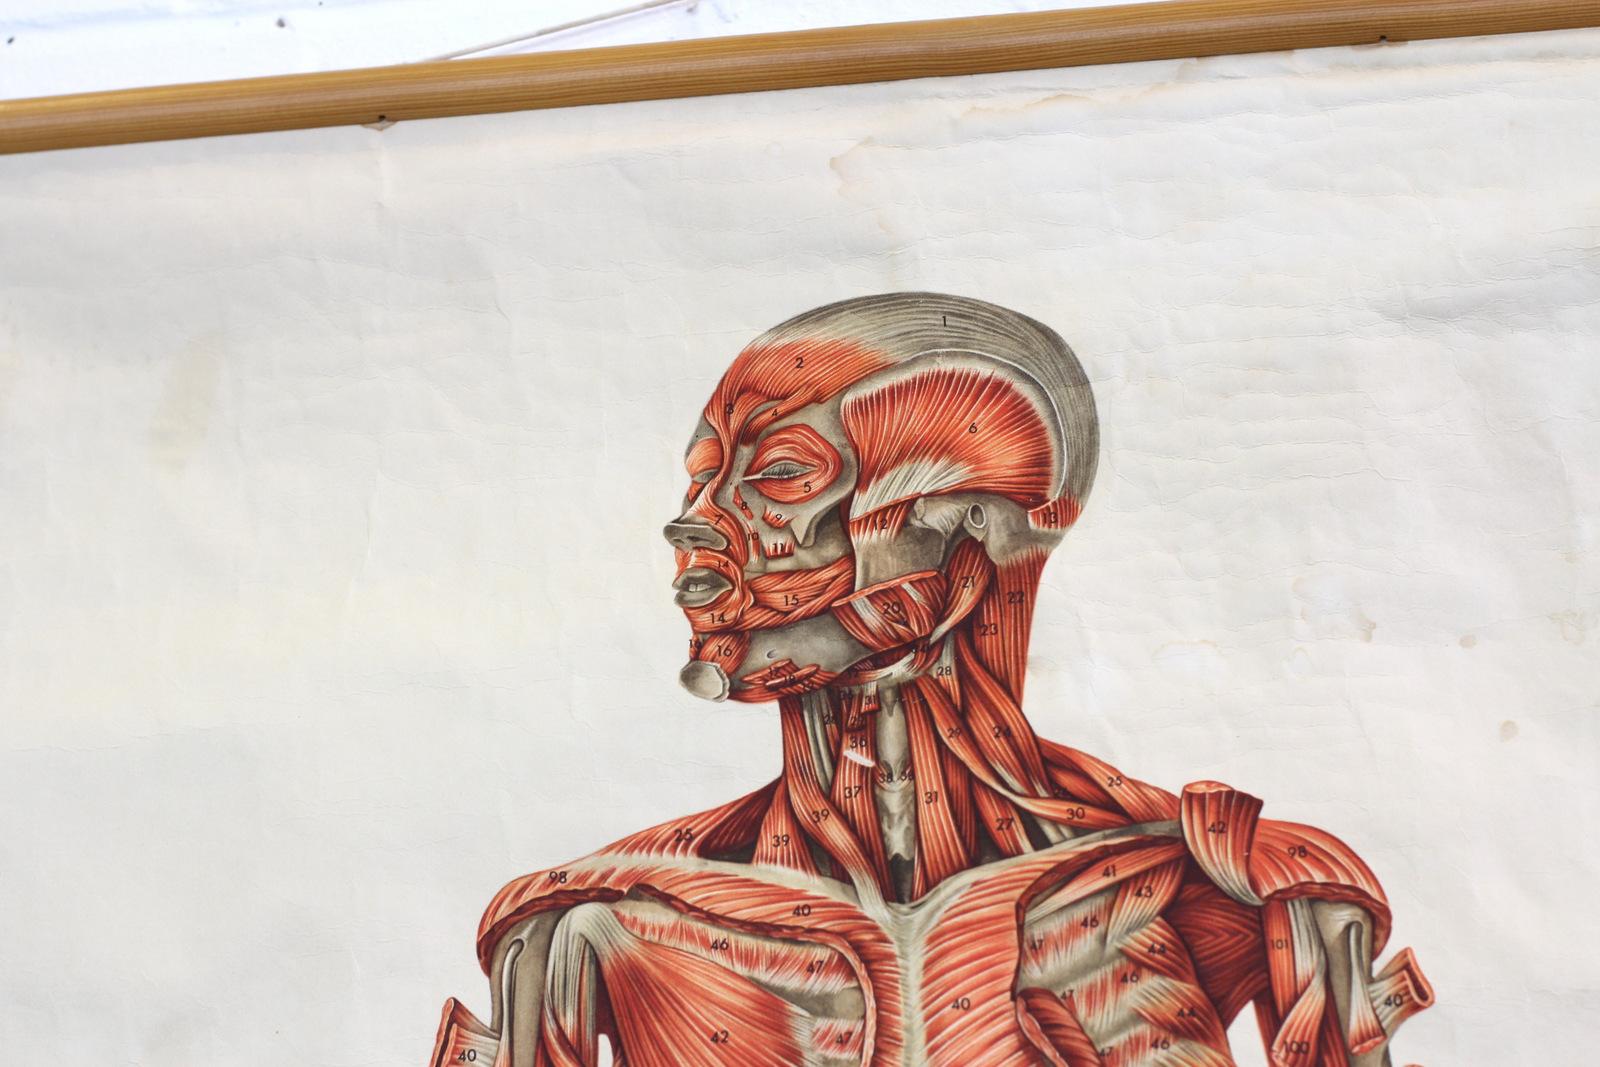 Anatomical Wall Chart Of The Muscles, circa 1960s

- Canvas backed
- Wooden hangers
- German, circa 1960s
- 117cm tall x 92cm wide

Condition Report

Some creasing and age marks to the front but no major tears or missing pieces.
       